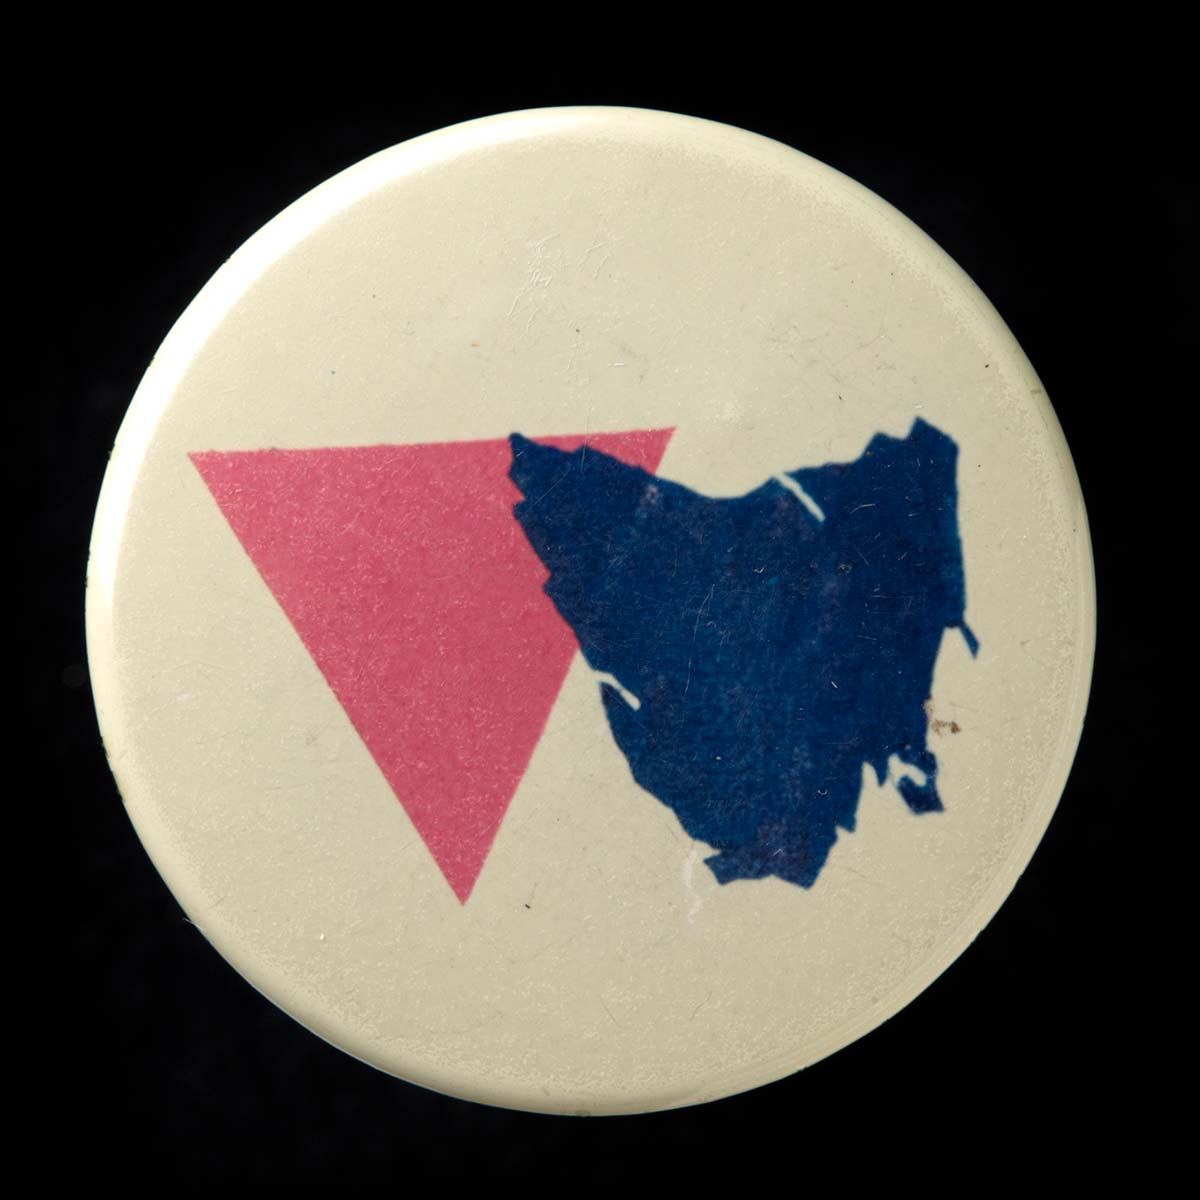 A political badge with a cream background and a design which features a pink triangle and a map of Tasmania in navy blue. - click to view larger image